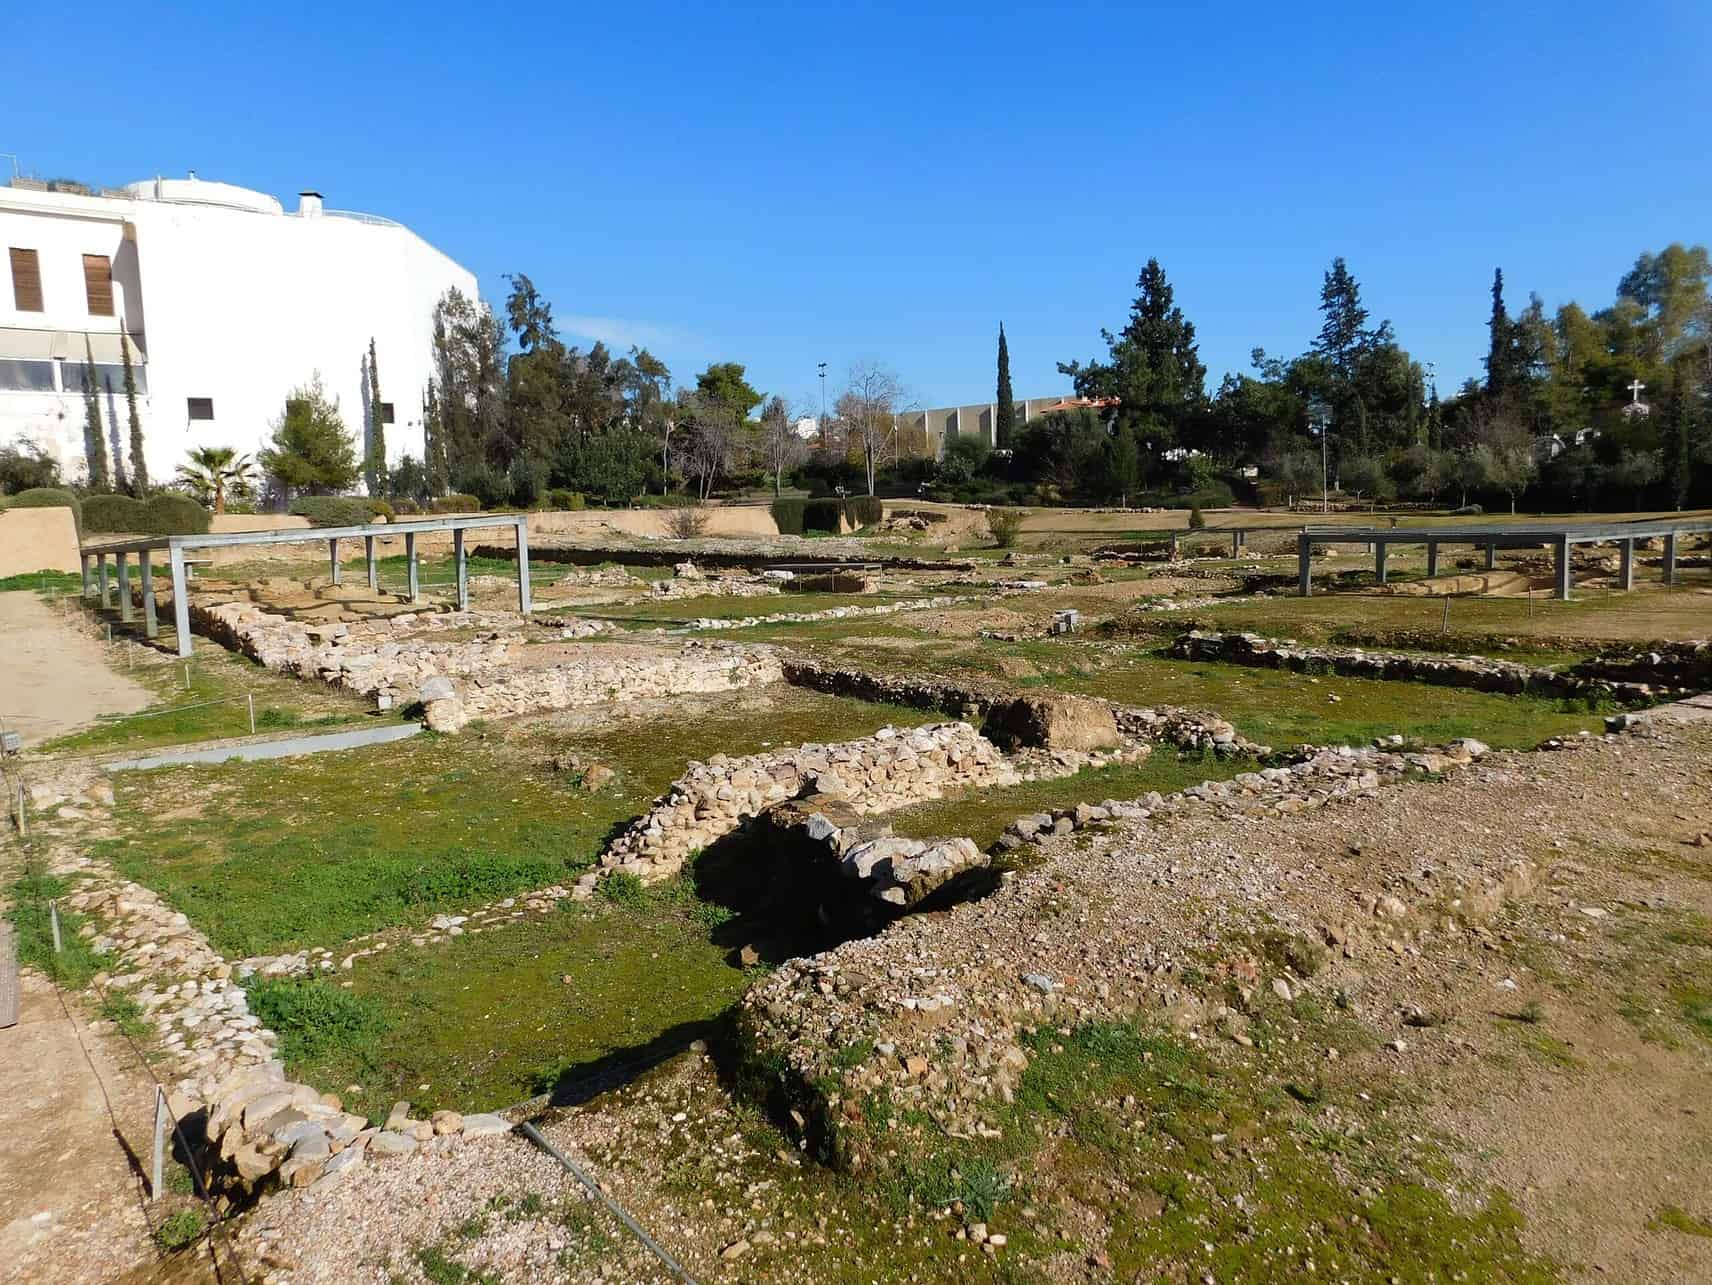 Aristotle’s Lyceum in Athens